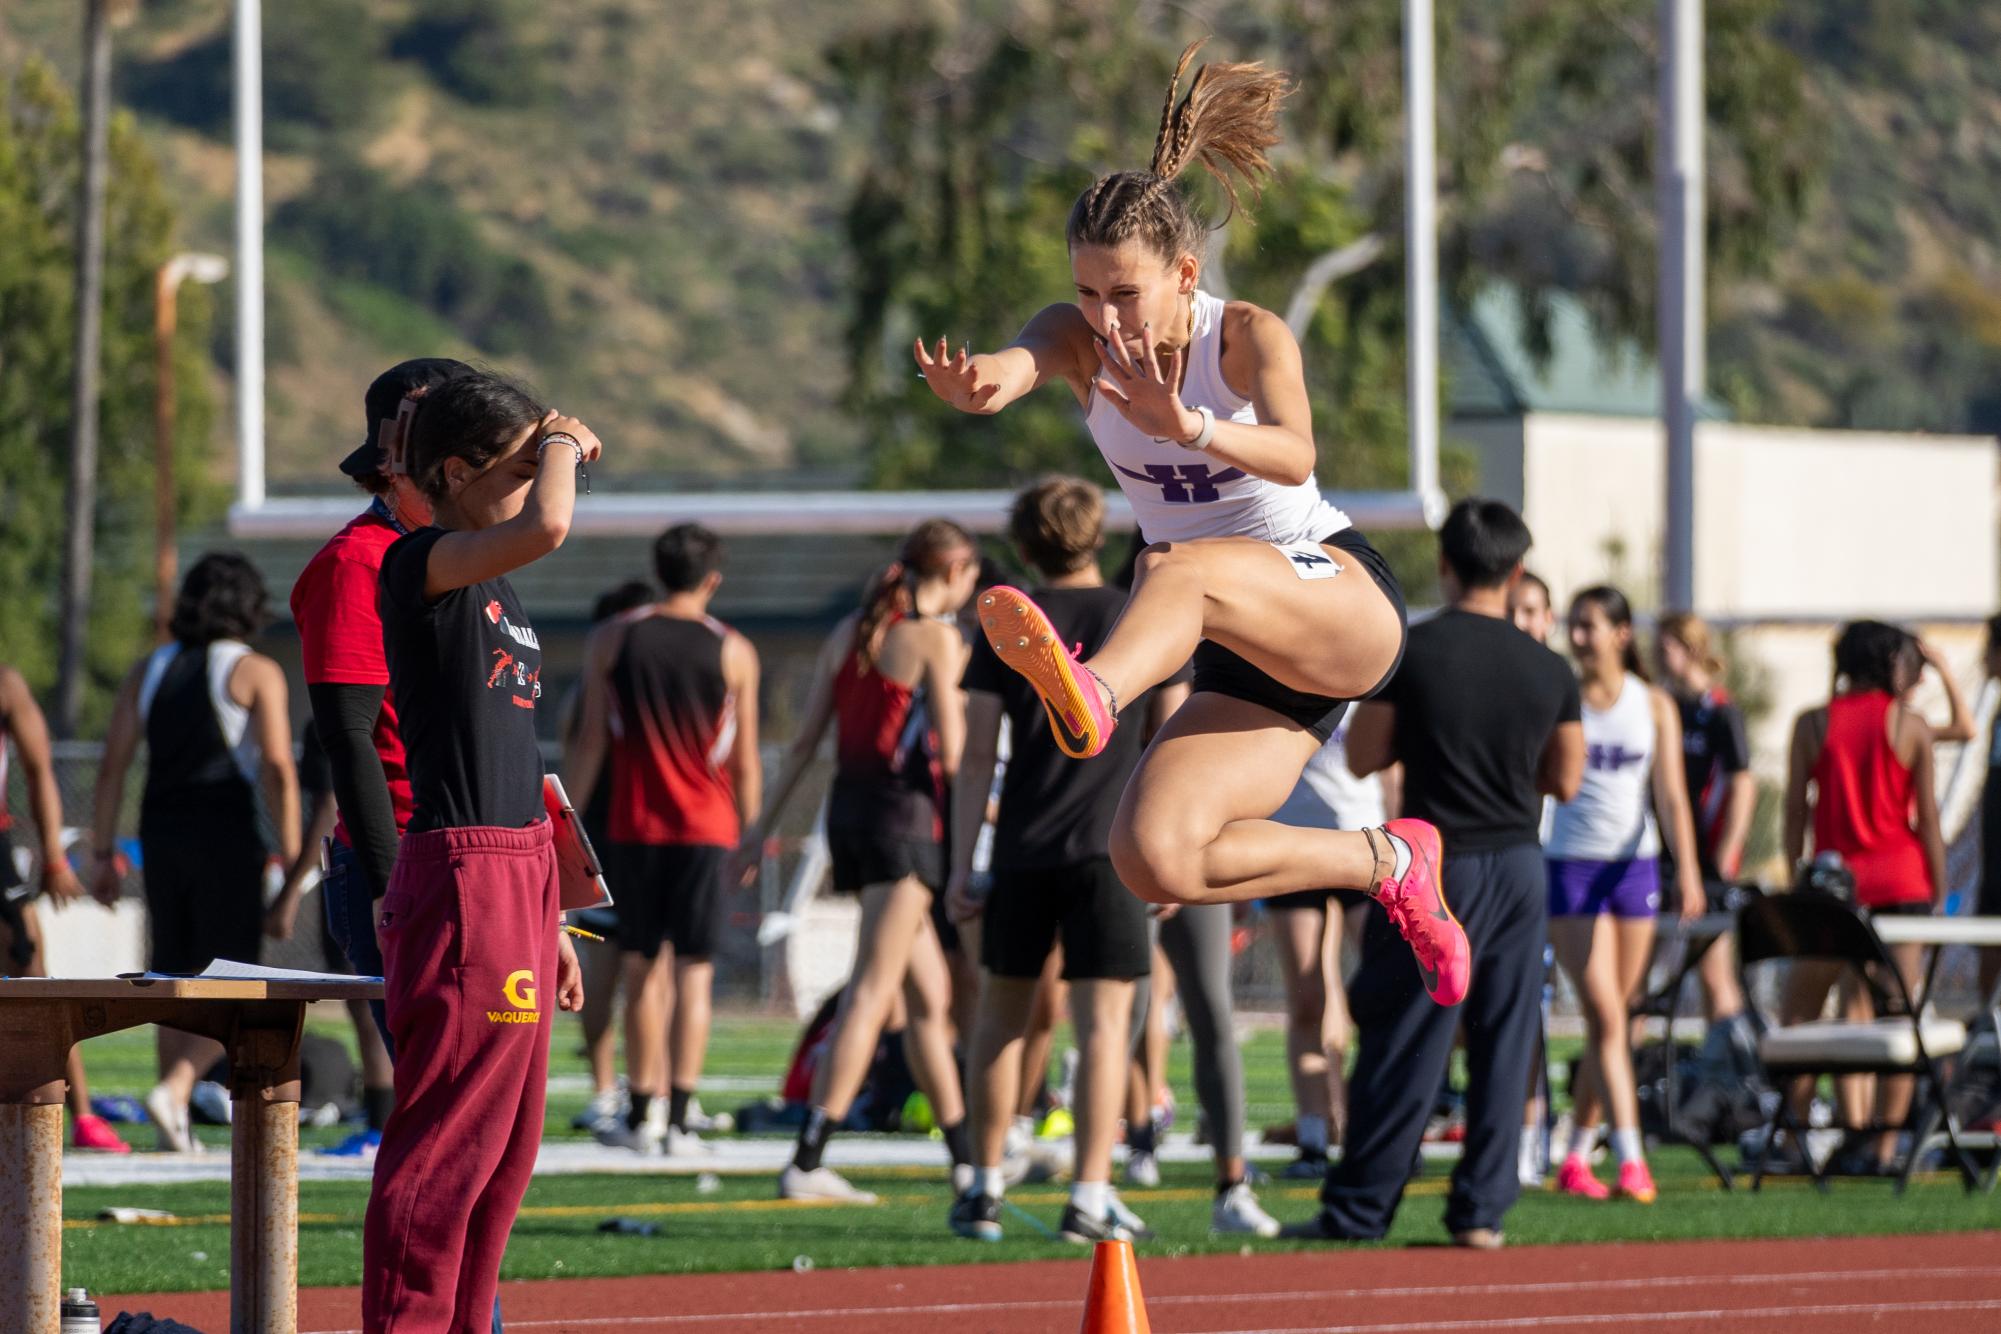 Hoover High track team clinches historic win against Glendale with standout athletes